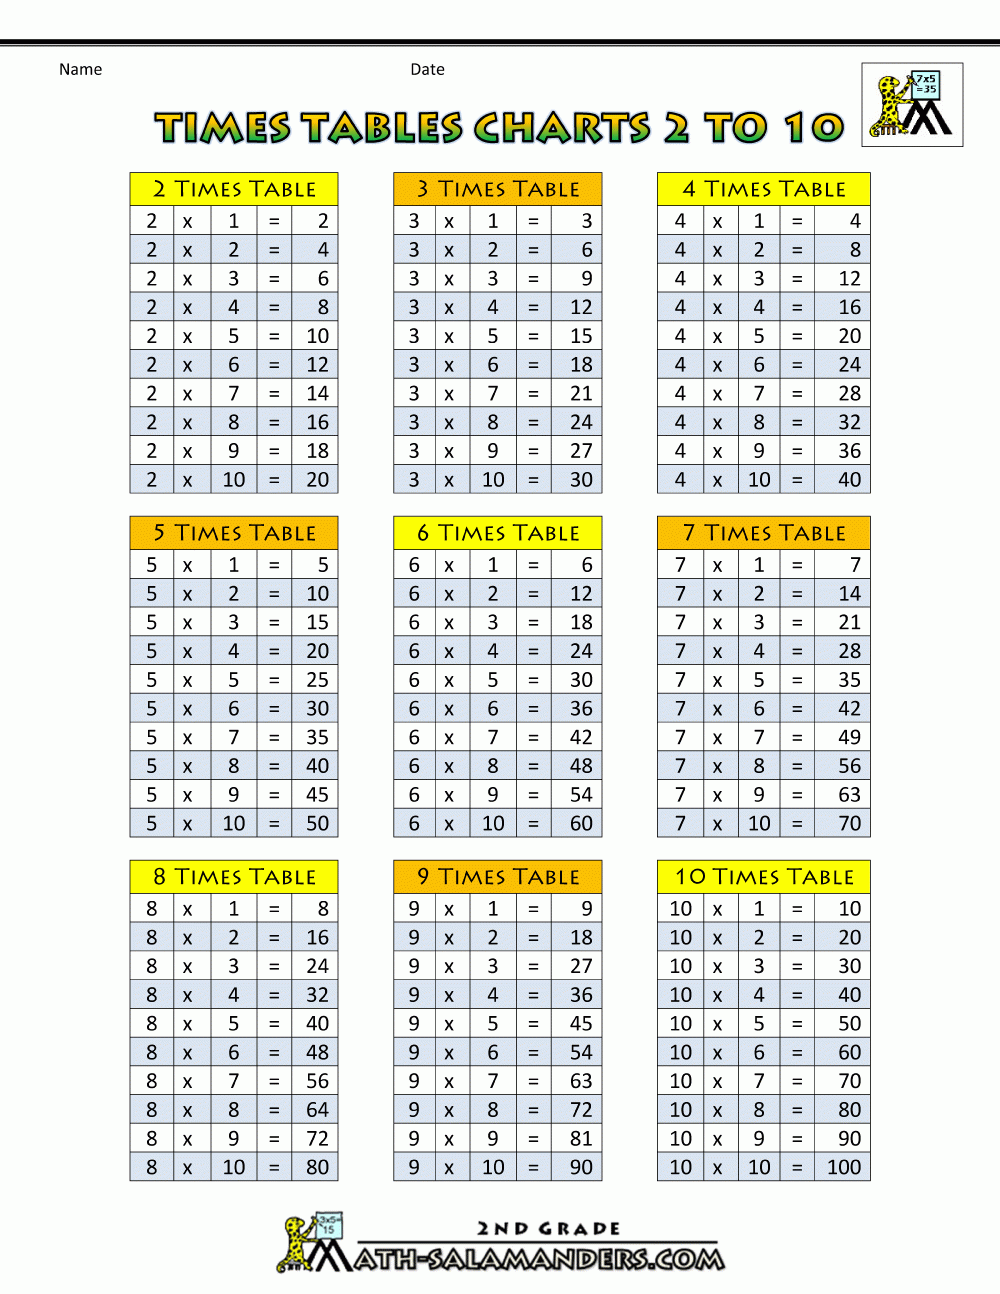 9 times table chart up to 20 - bdafy